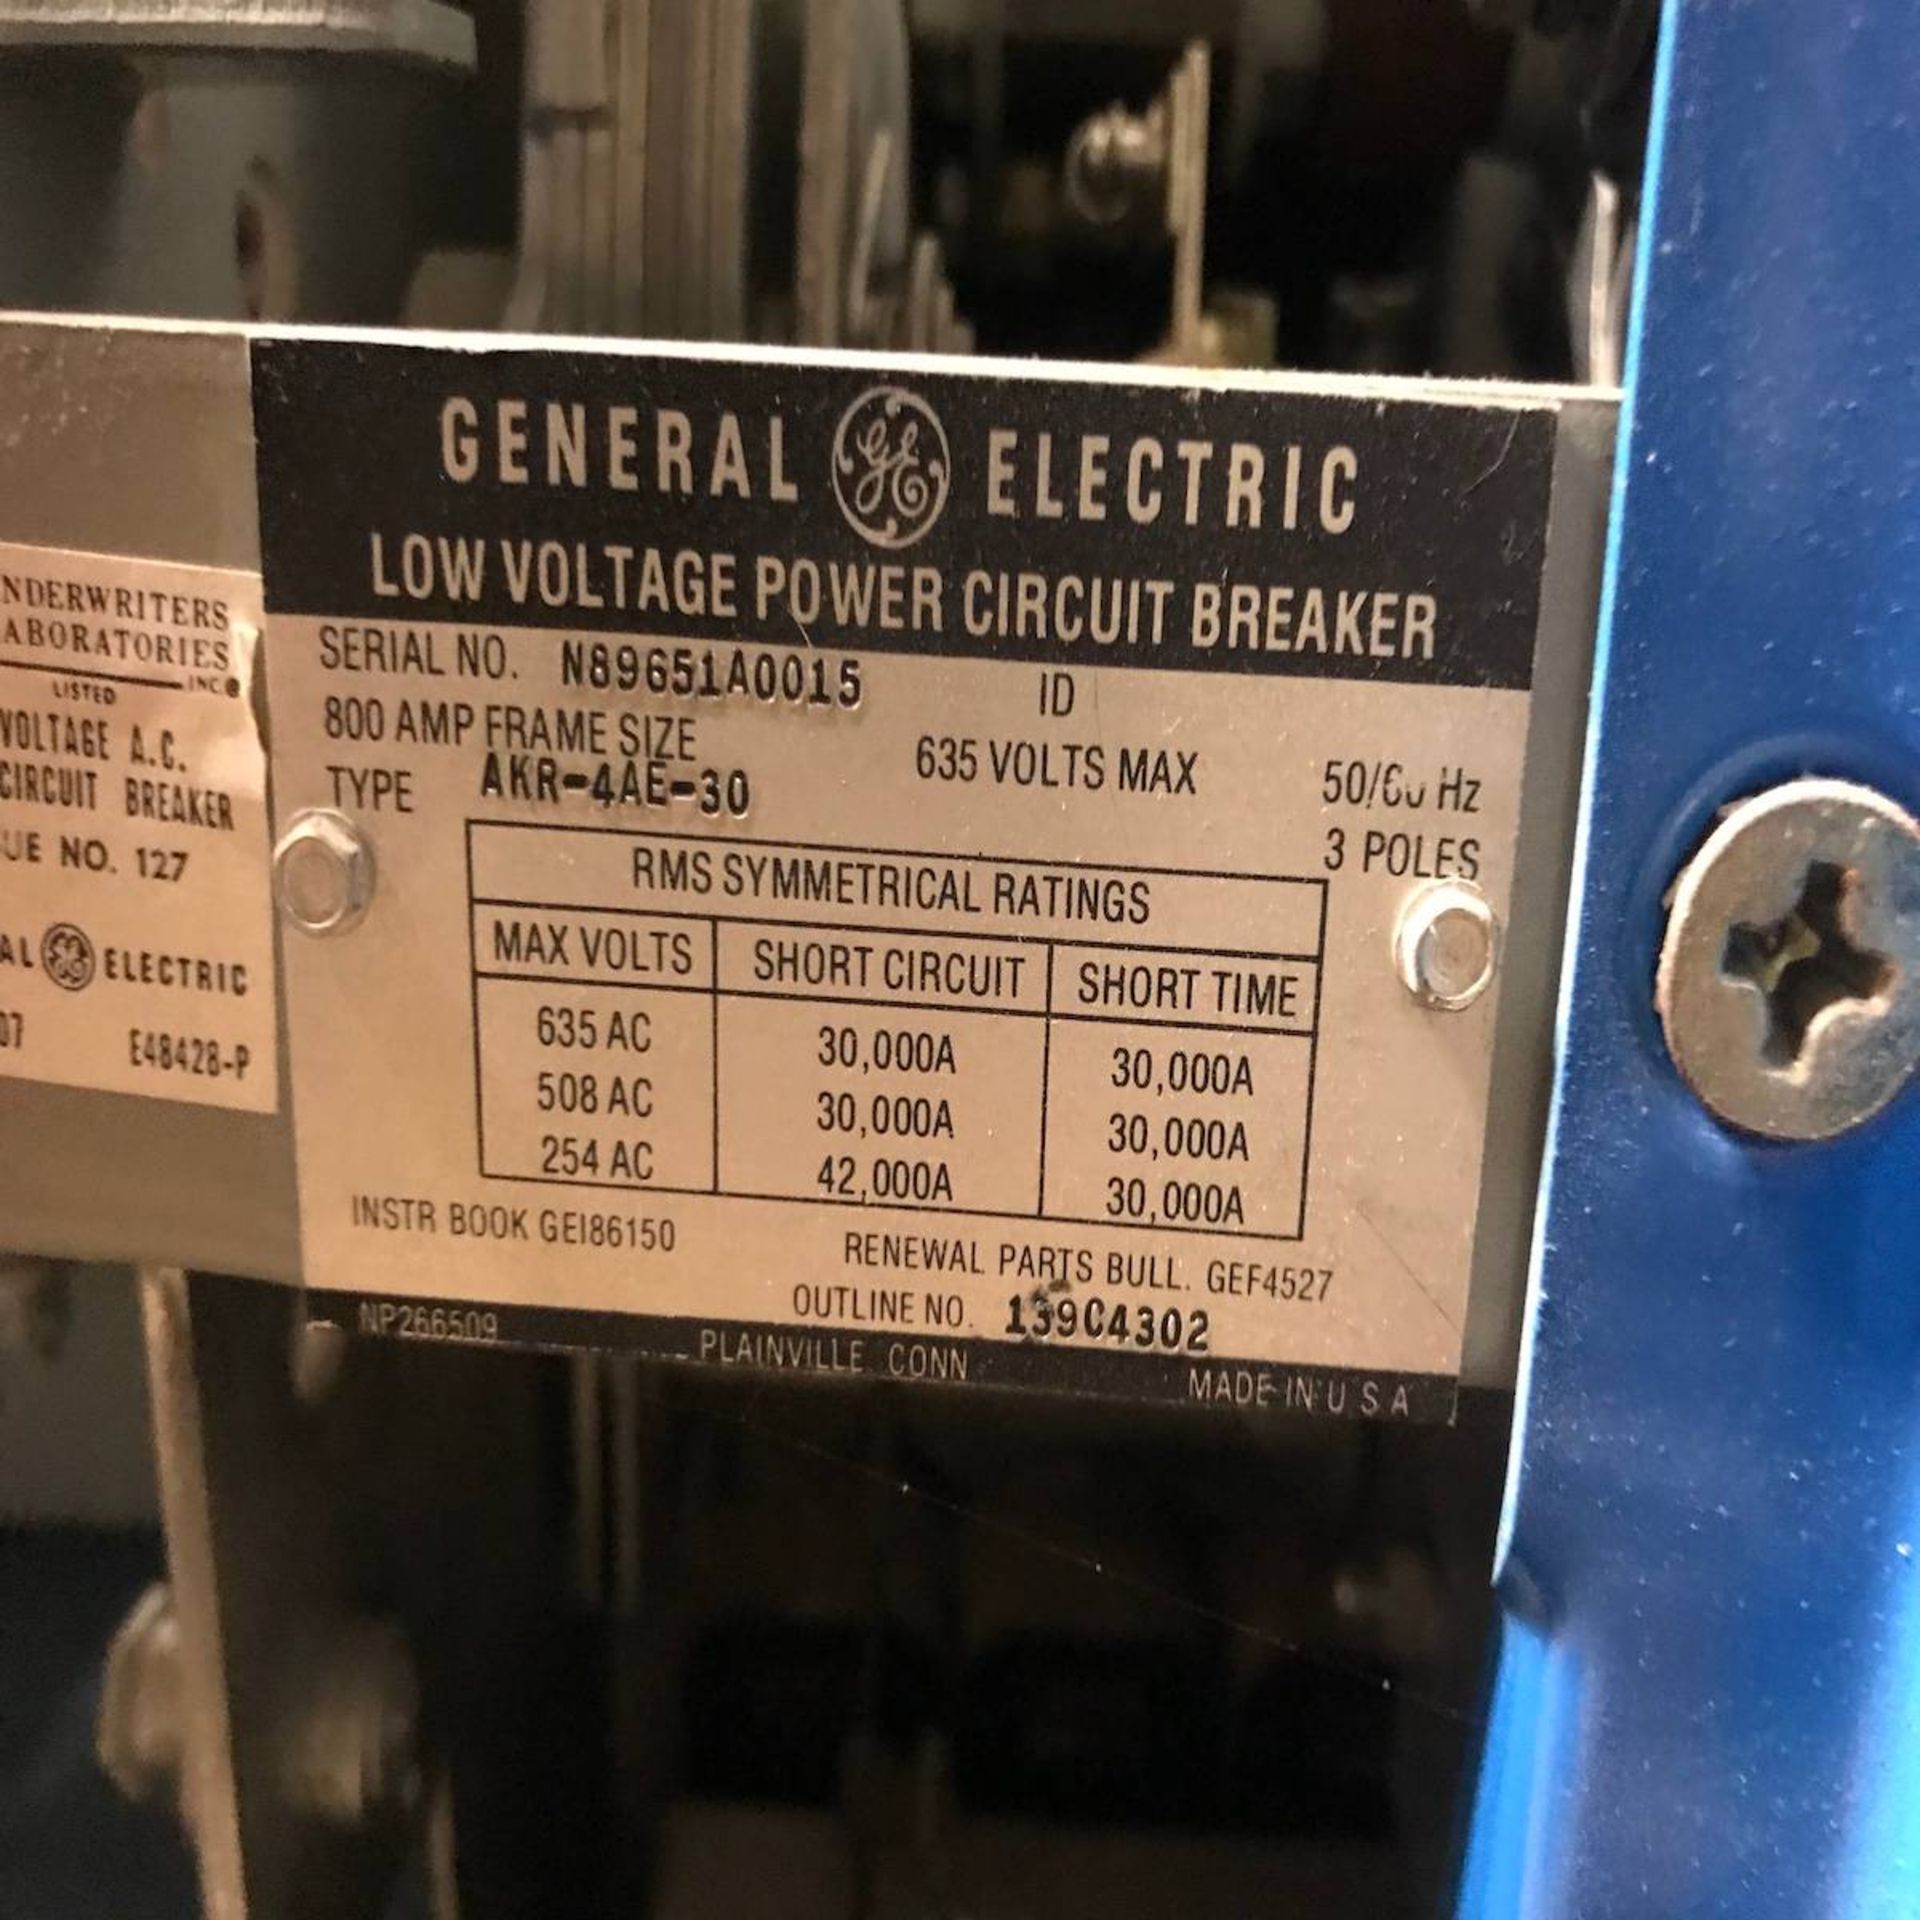 General Electric AKR-4AE-30 Low Voltage Power Circuit Breaker - Image 4 of 4